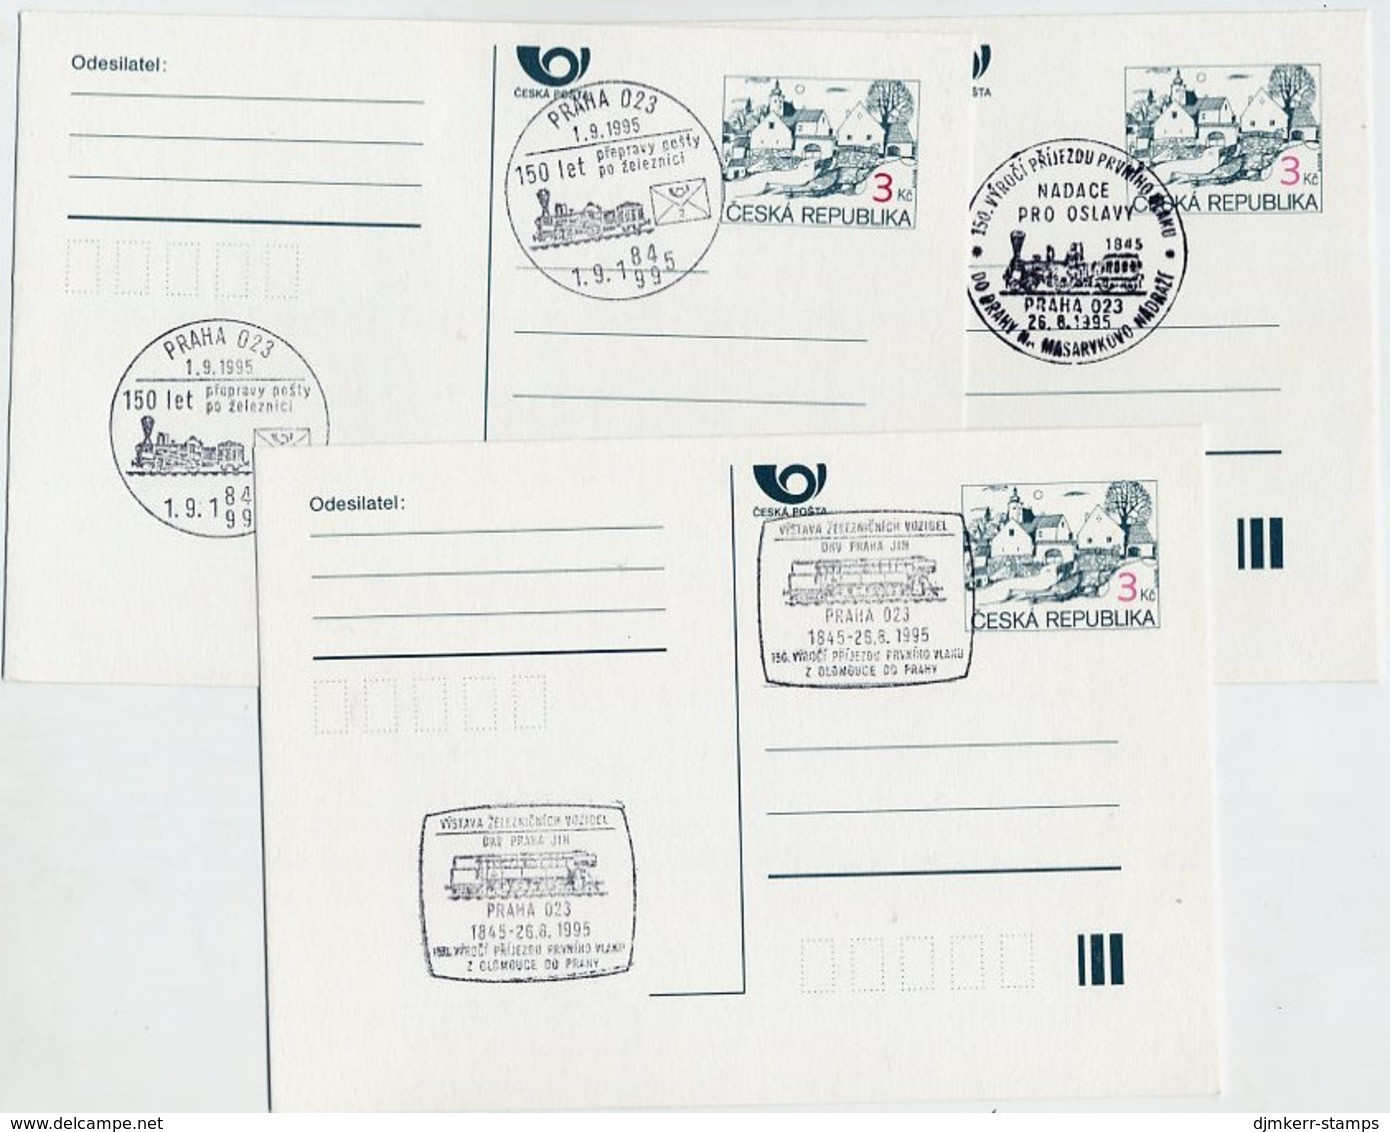 CZECH REPUBLIC 1995 Railway Anniversary 3 Kc.stationery Cards Cancelled With Commemorative Postmarks. - Briefe U. Dokumente